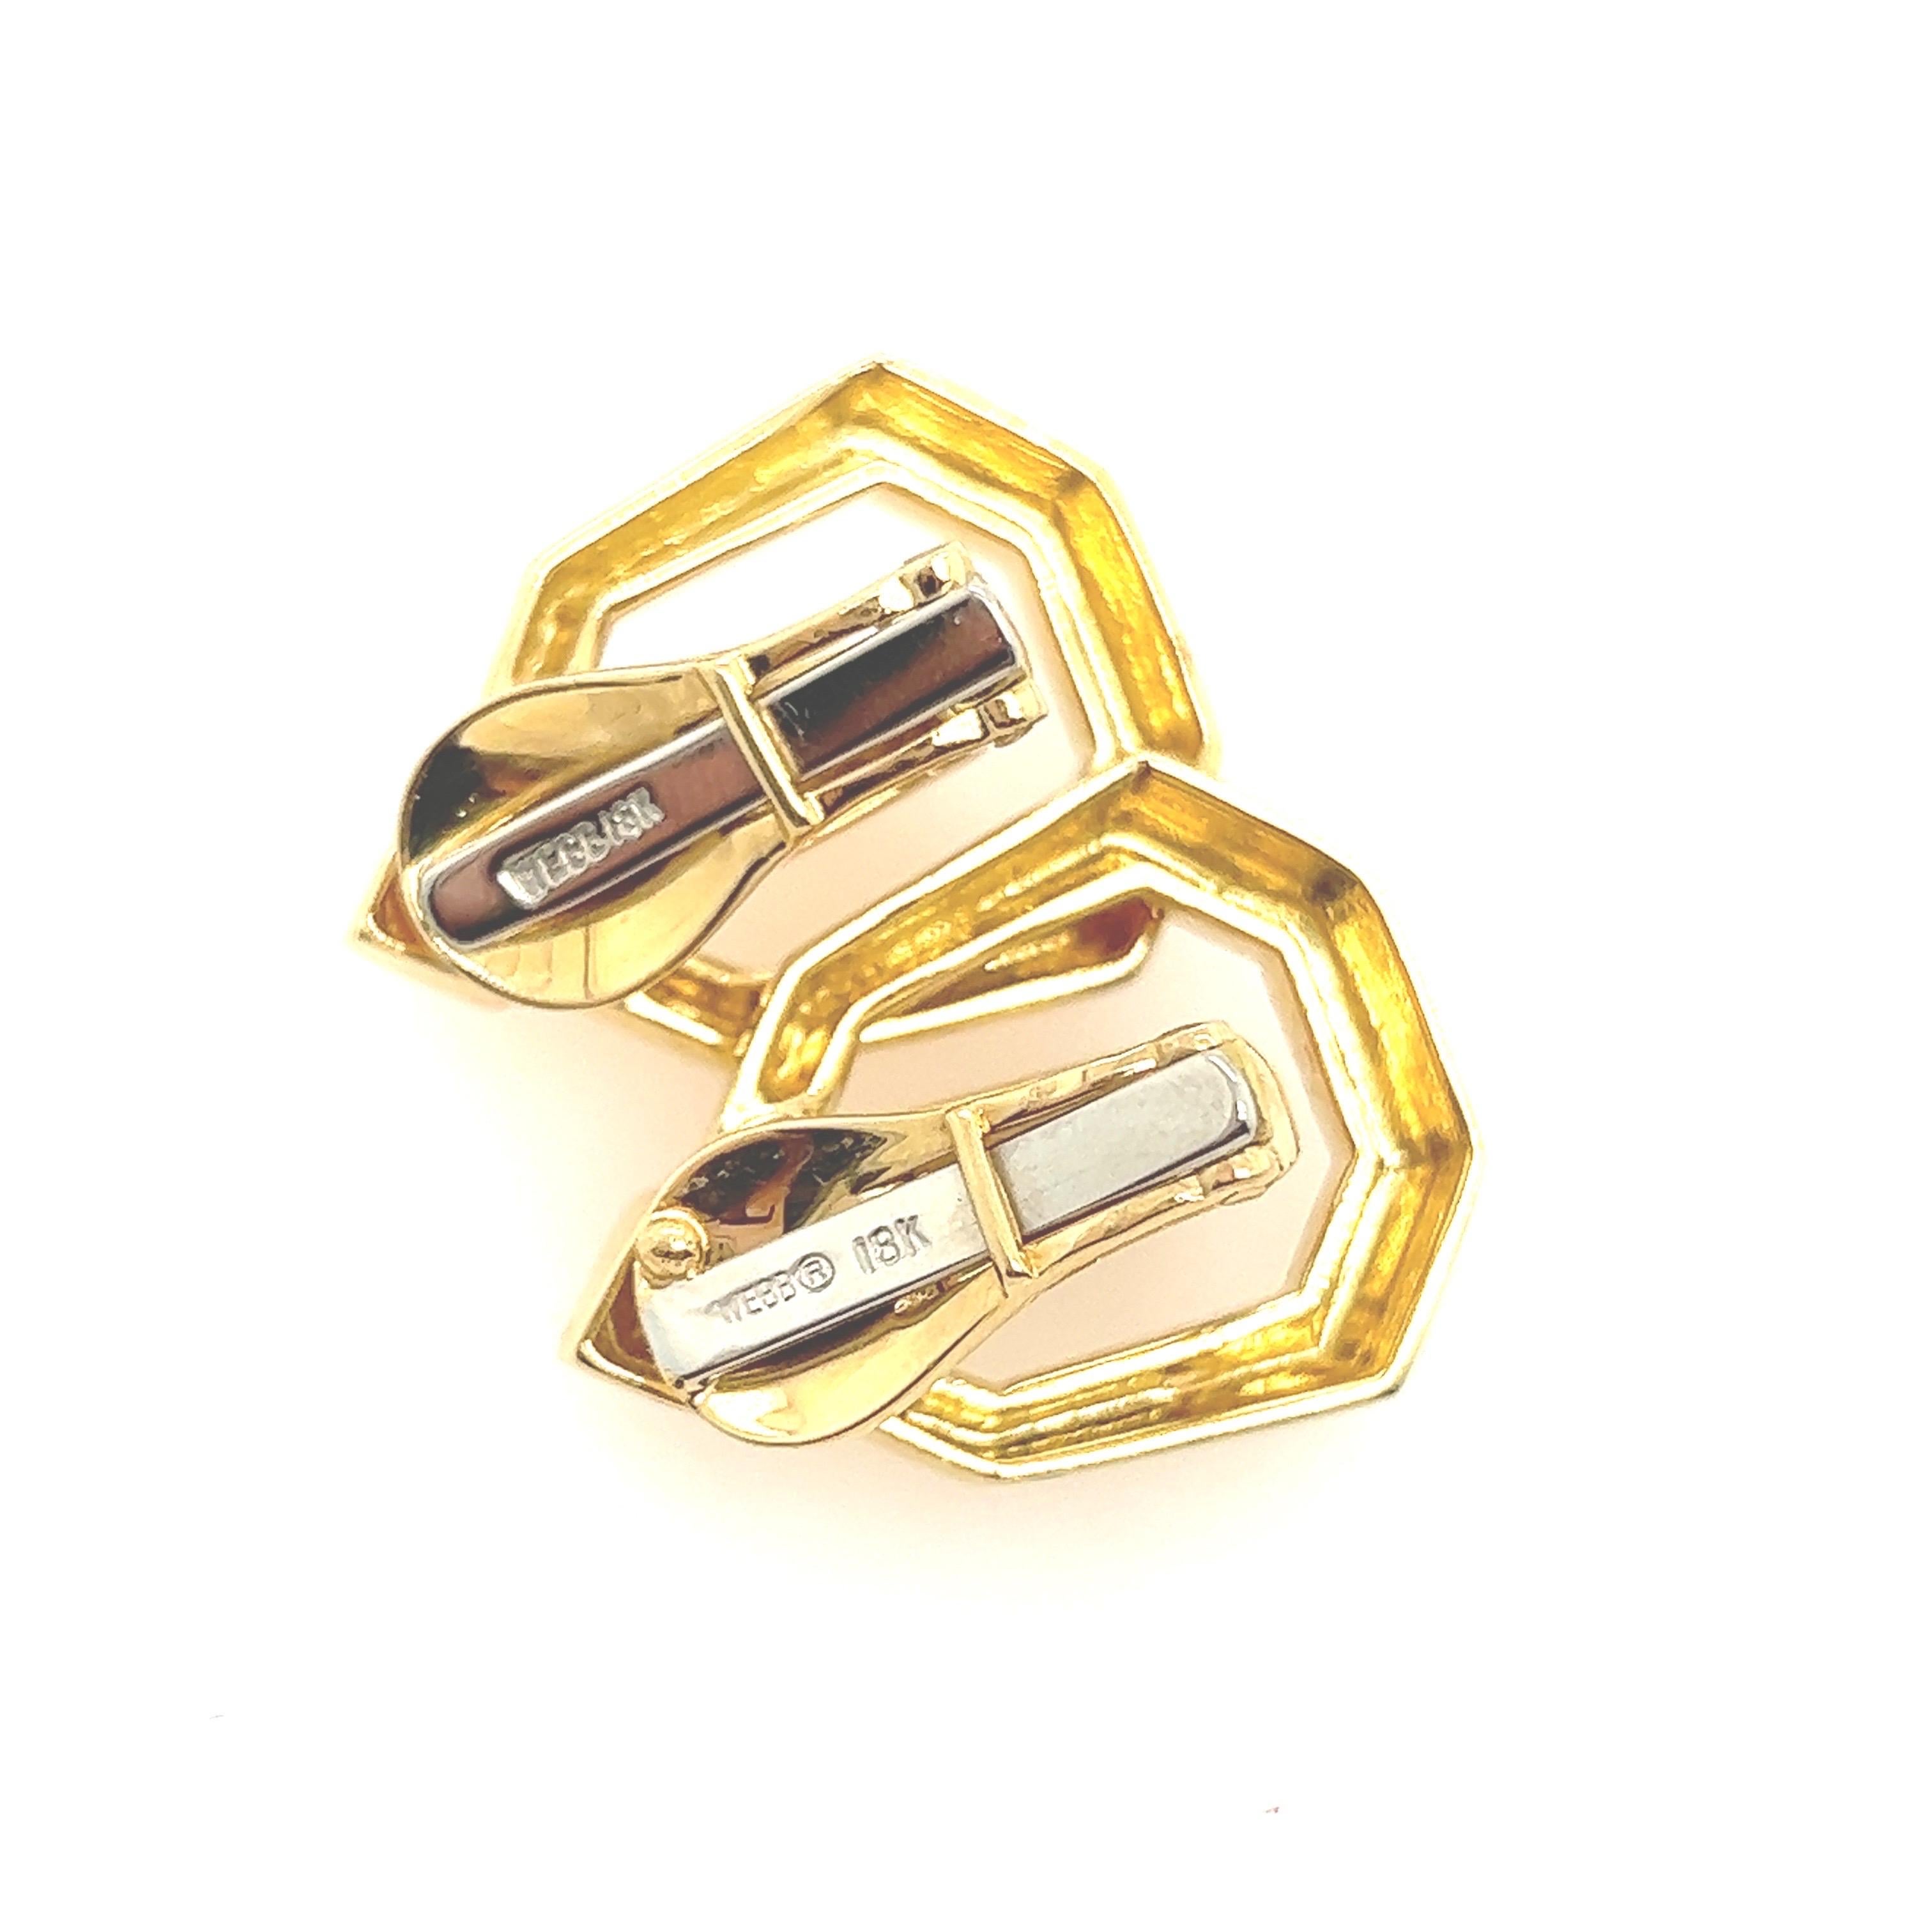 These earrings take a staple and elevate it to another level. Made in 18kt yellow gold these clip on style David Webb earrings are classic enough to wear over and over again, but unique enough to add flair to any outfit.